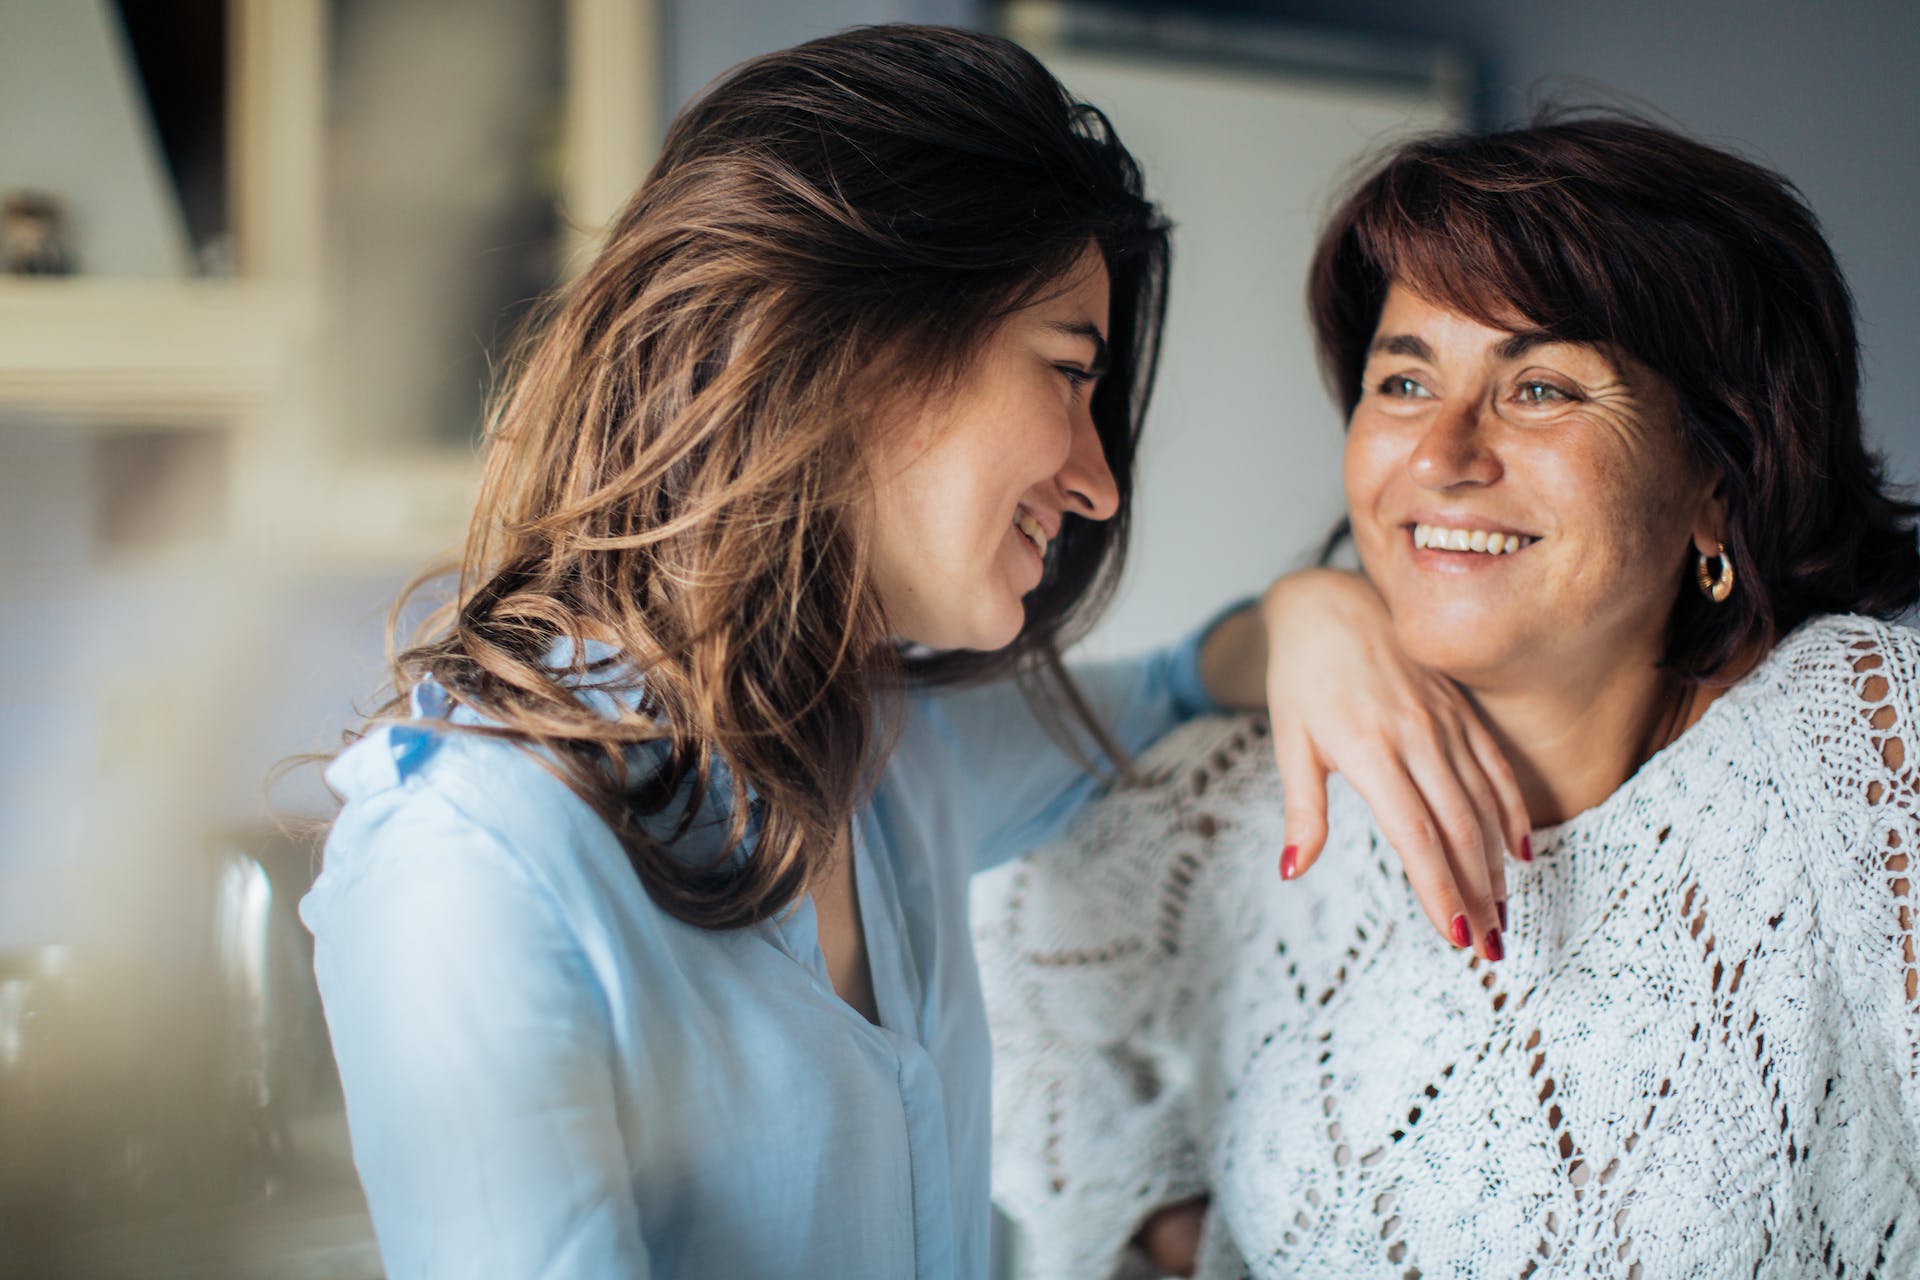 Mother and daughter smiling | Source: Pexels